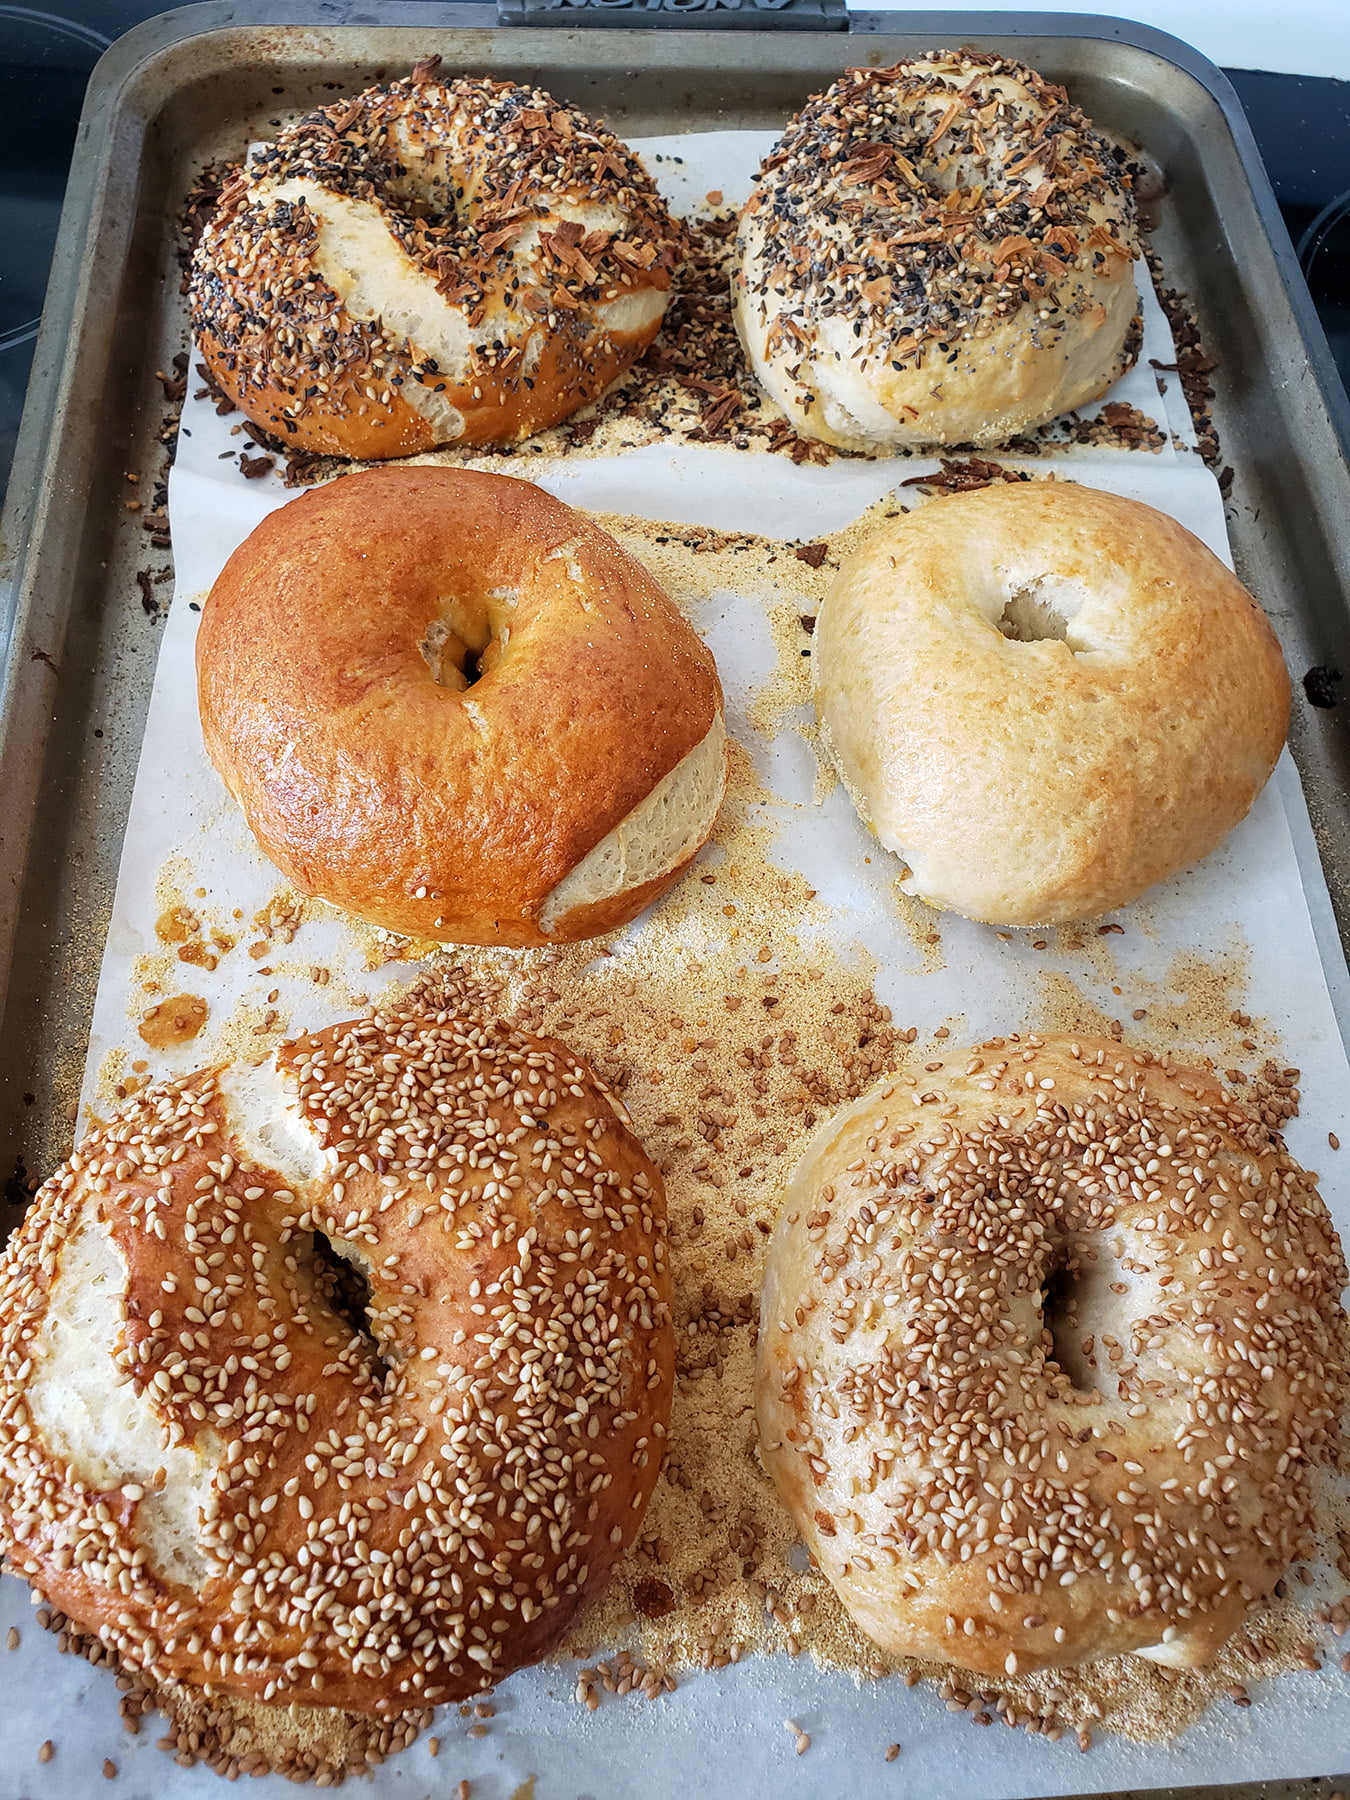 A pan of 6 bagels, fresh out of the oven. 2 are plain, two are coated in sesame seeds, and 2 are coated with "everything" seasoning.